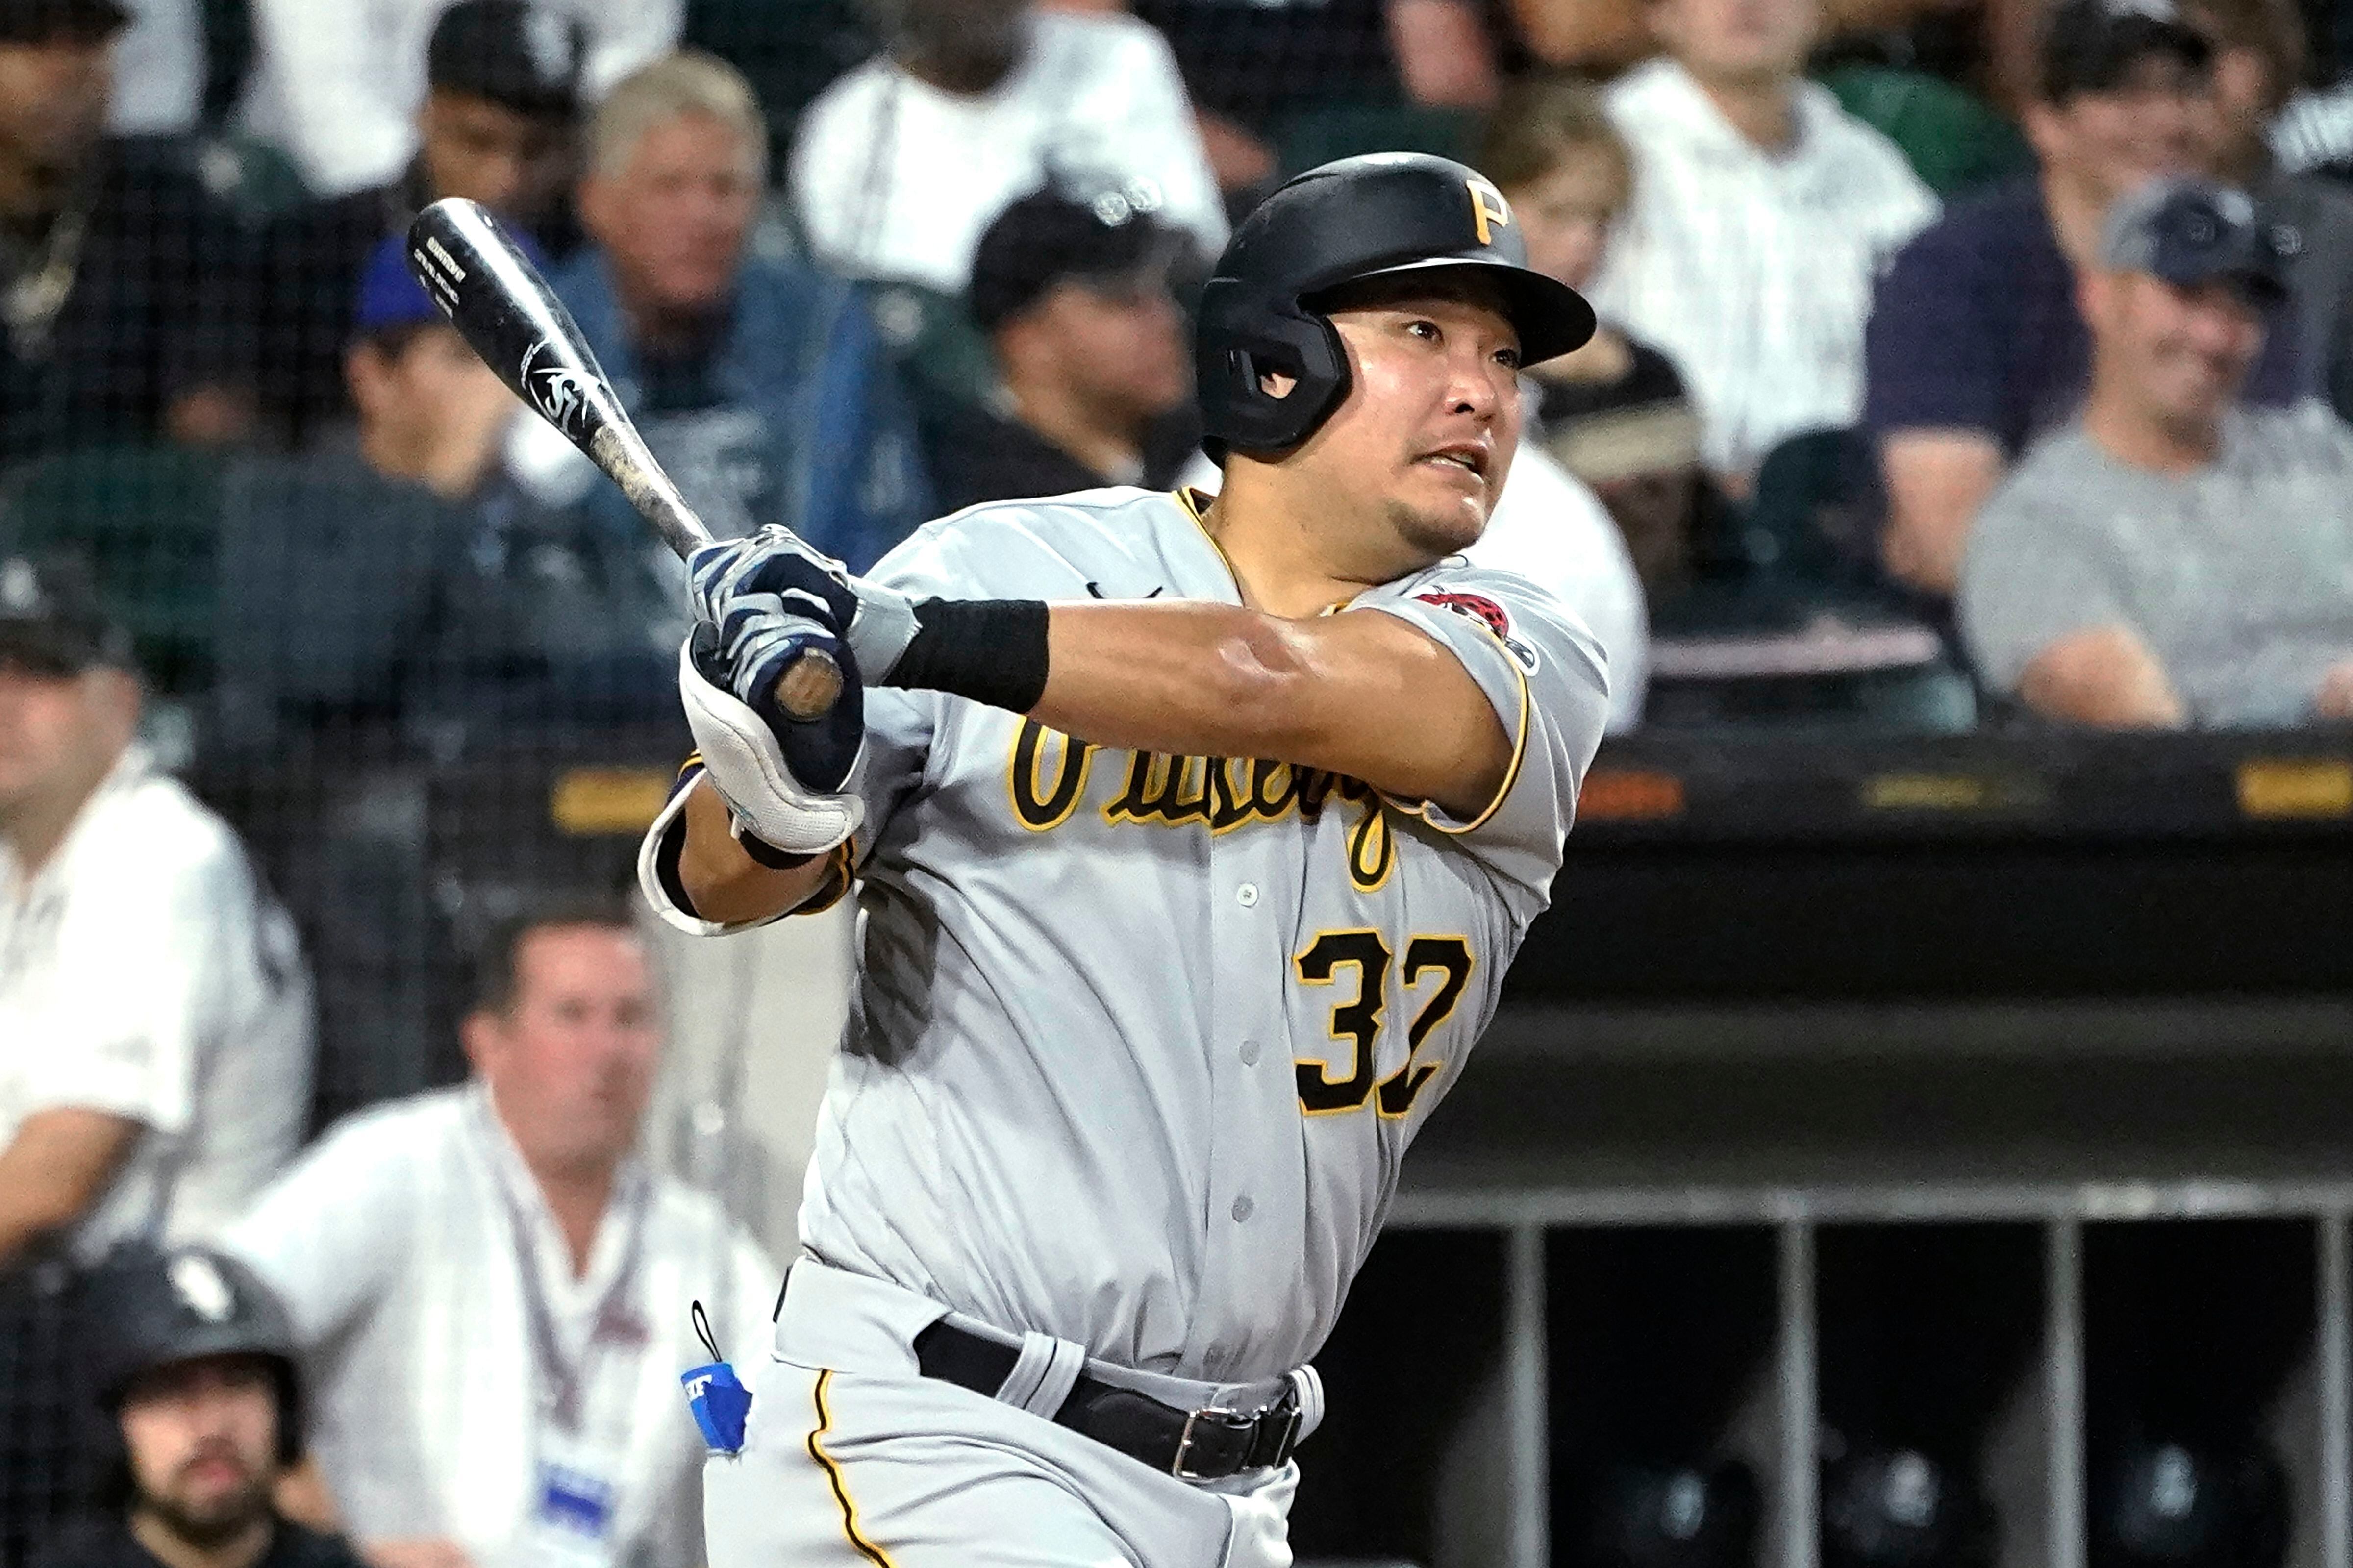 Rookie DH Gavin Sheets homers twice as White Sox beat Pirates to